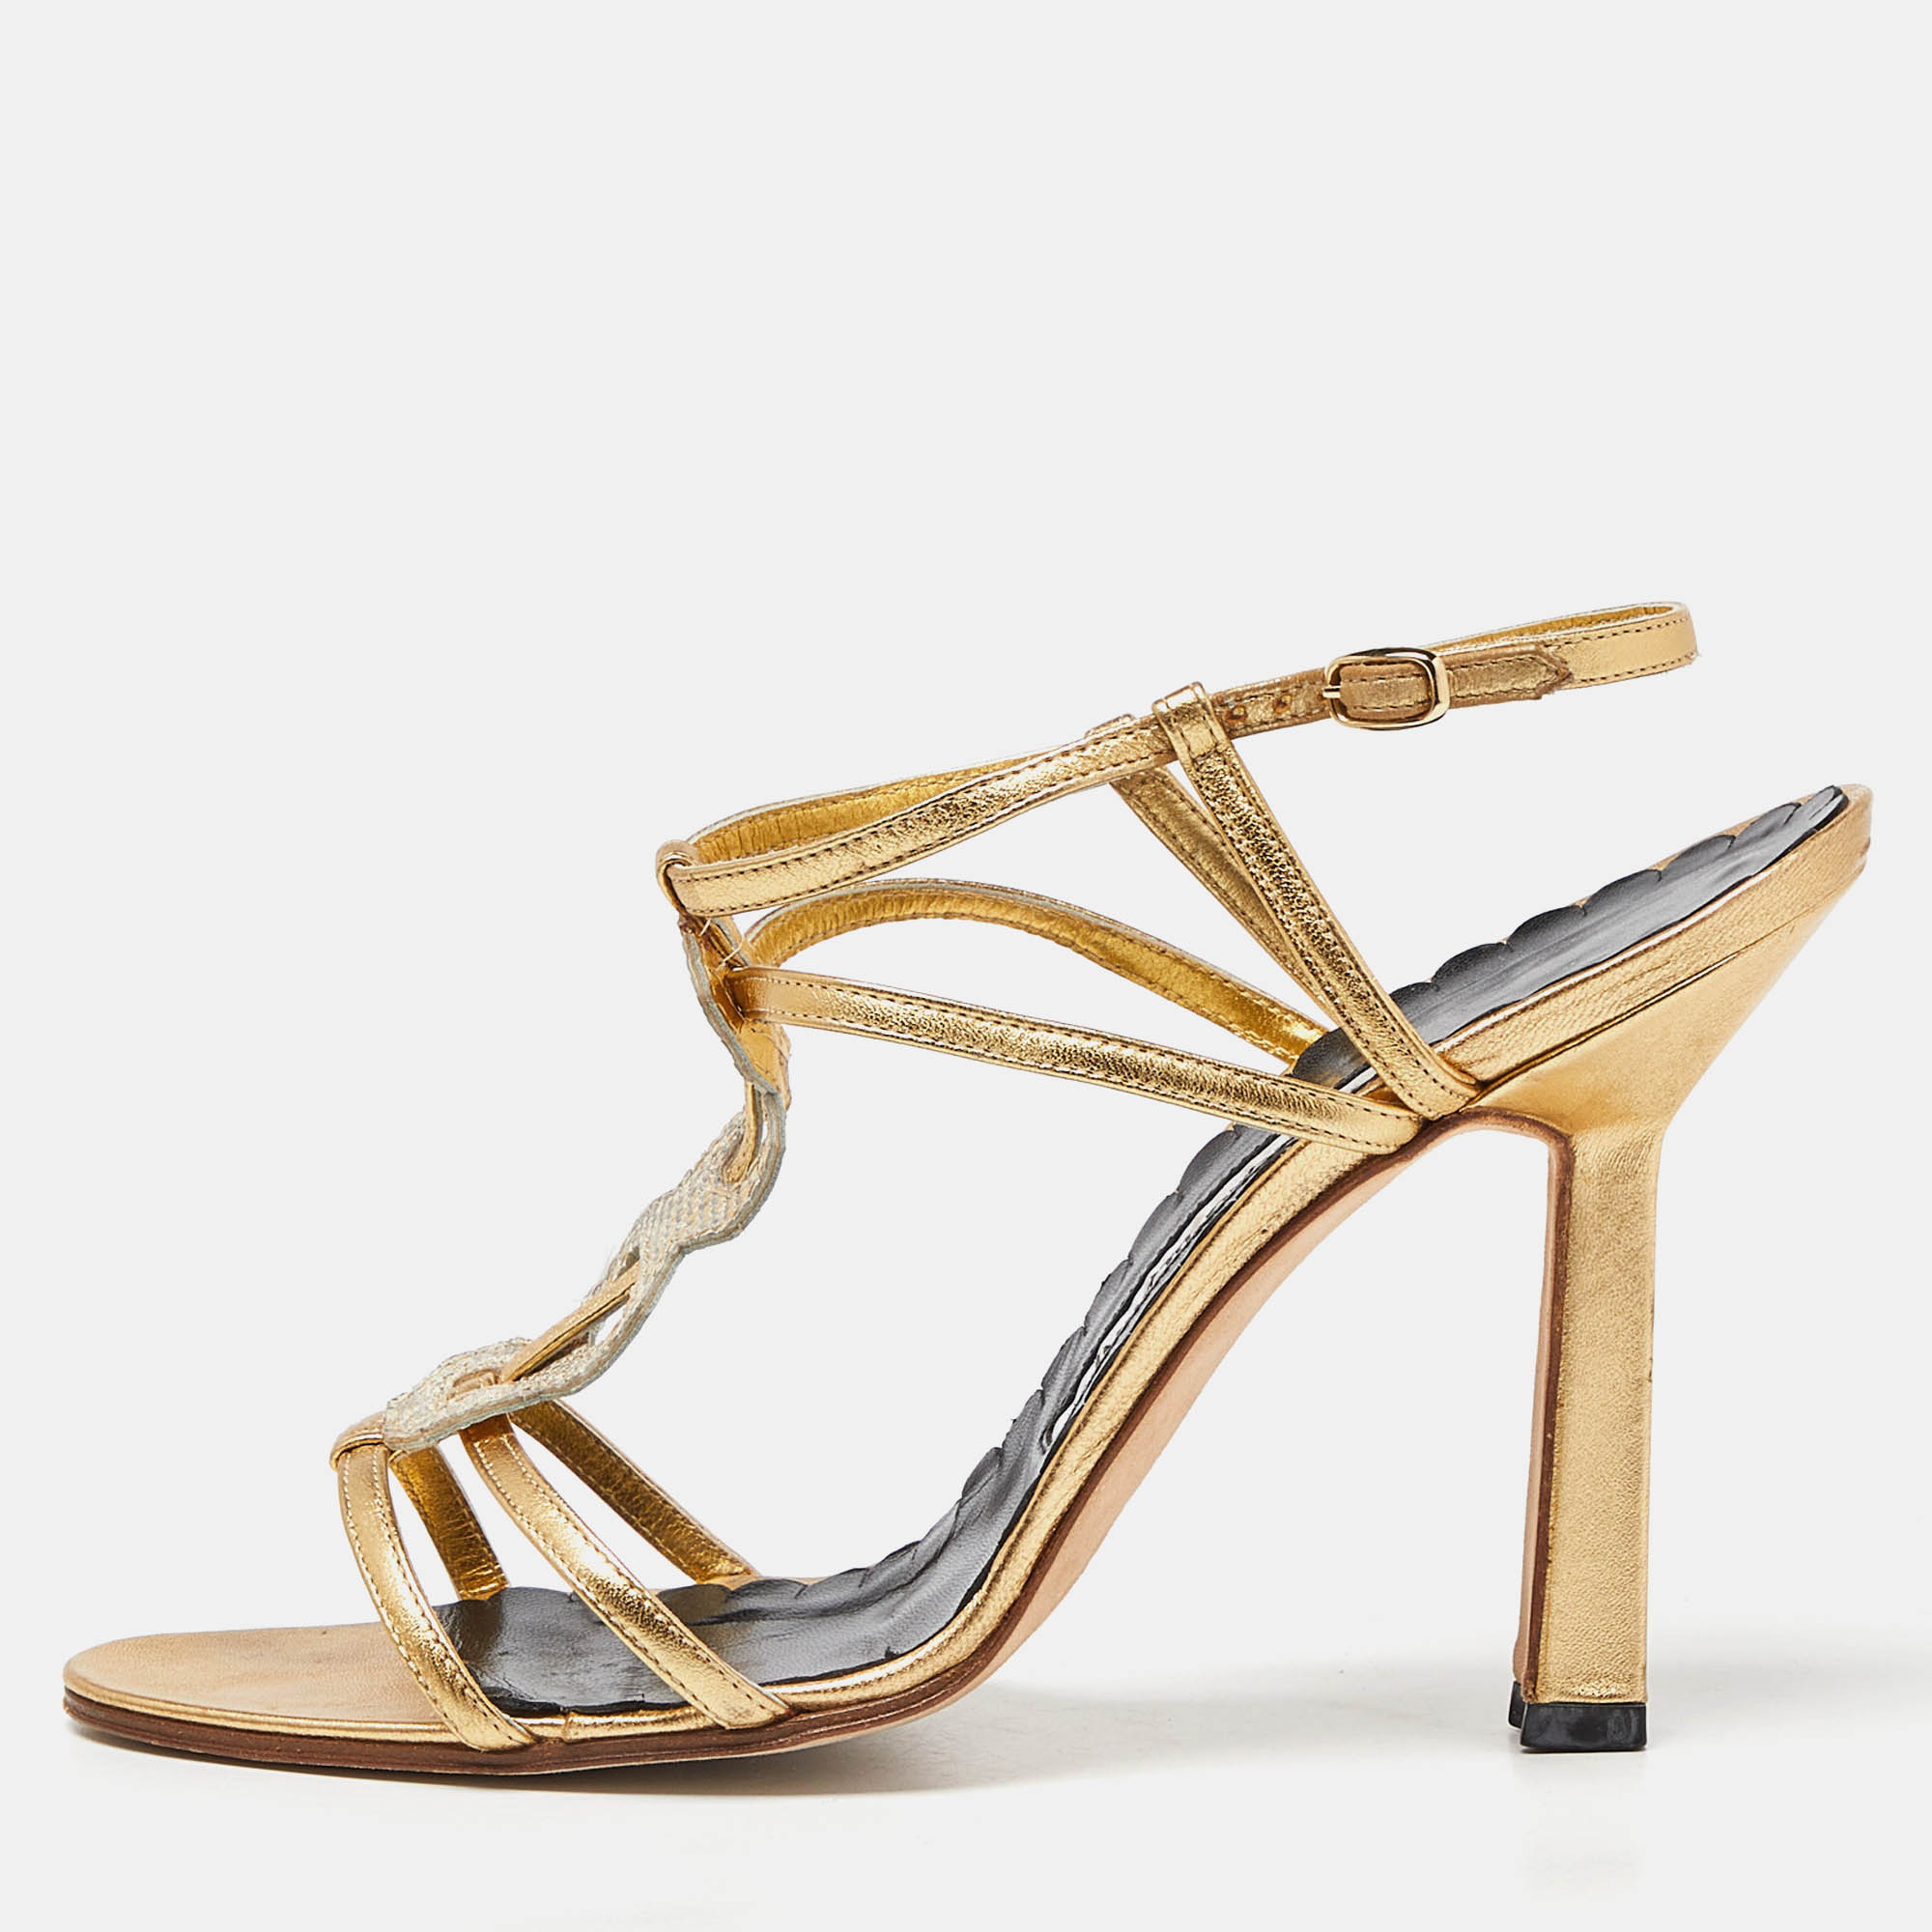 Manolo blahnik gold embossed leather ankle strap sandals size 39.5